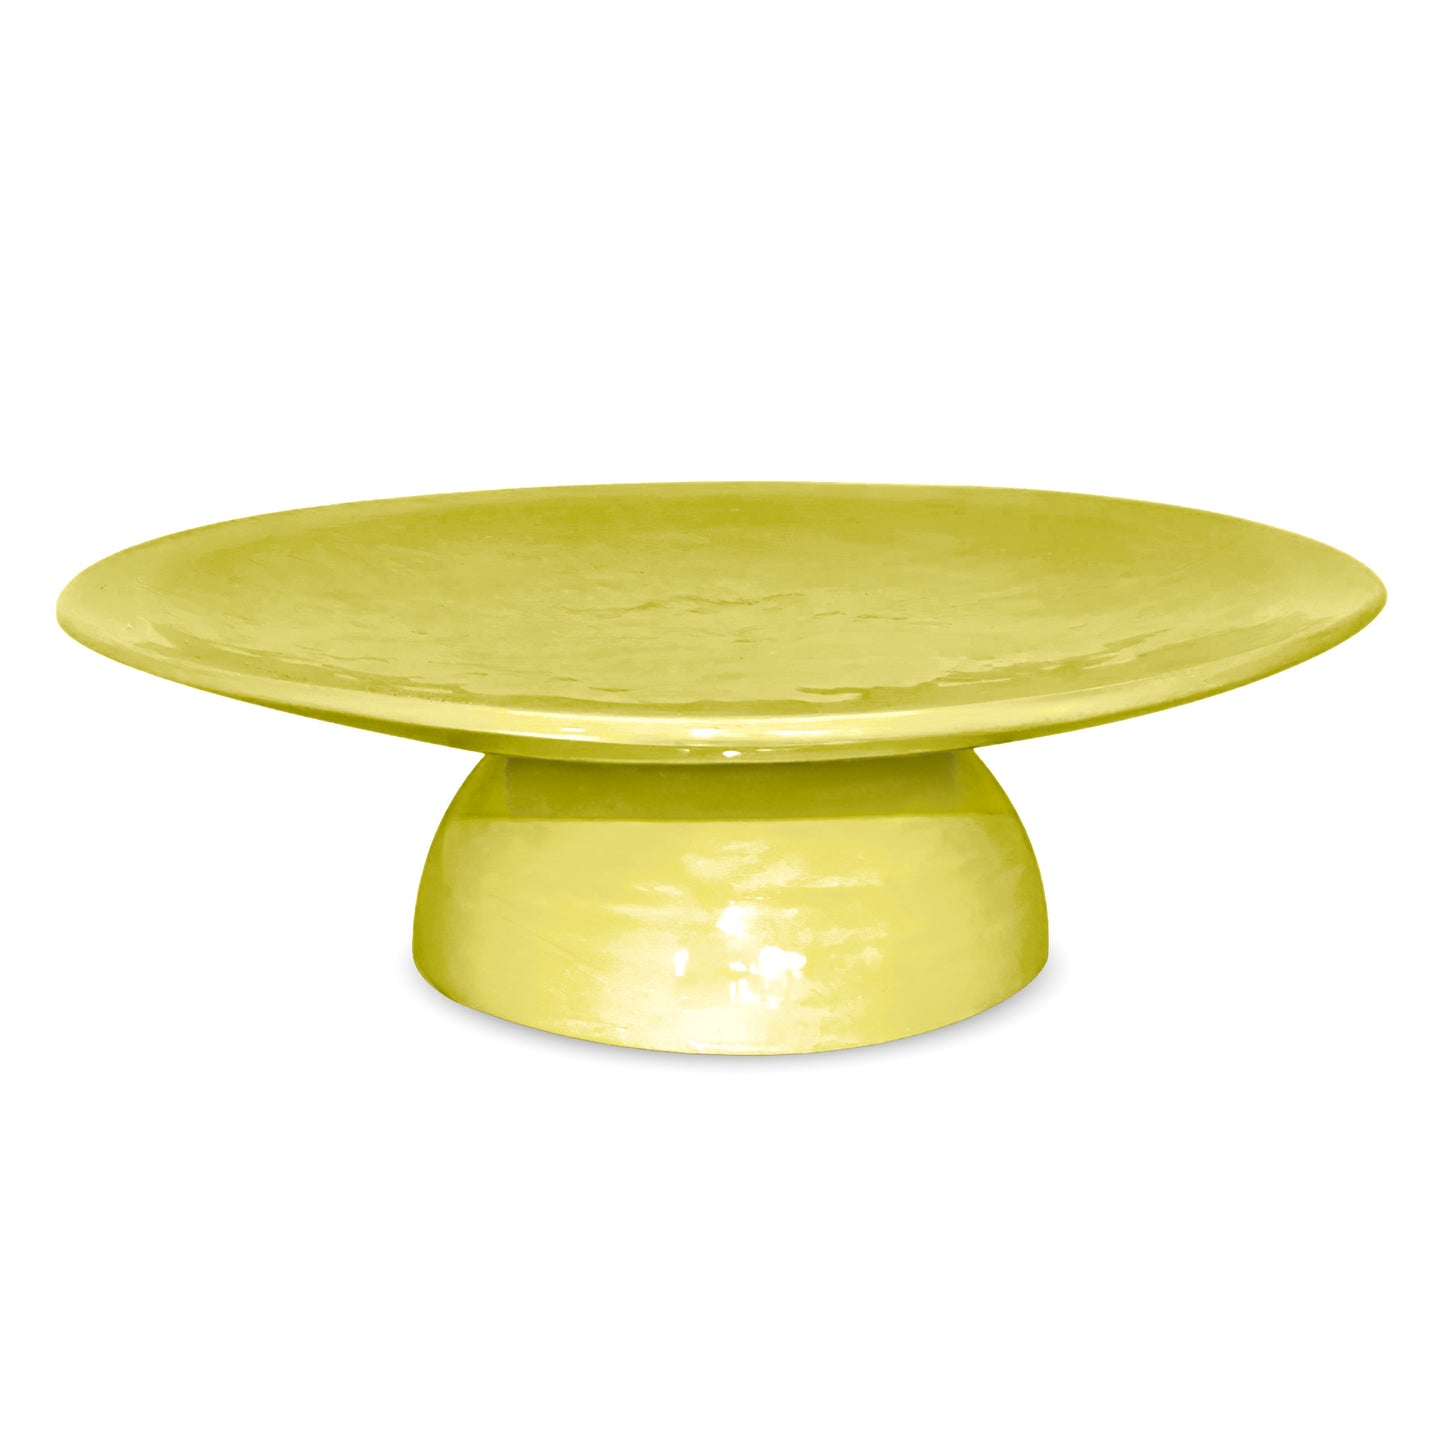 CAKE STAND CHARTREUSE